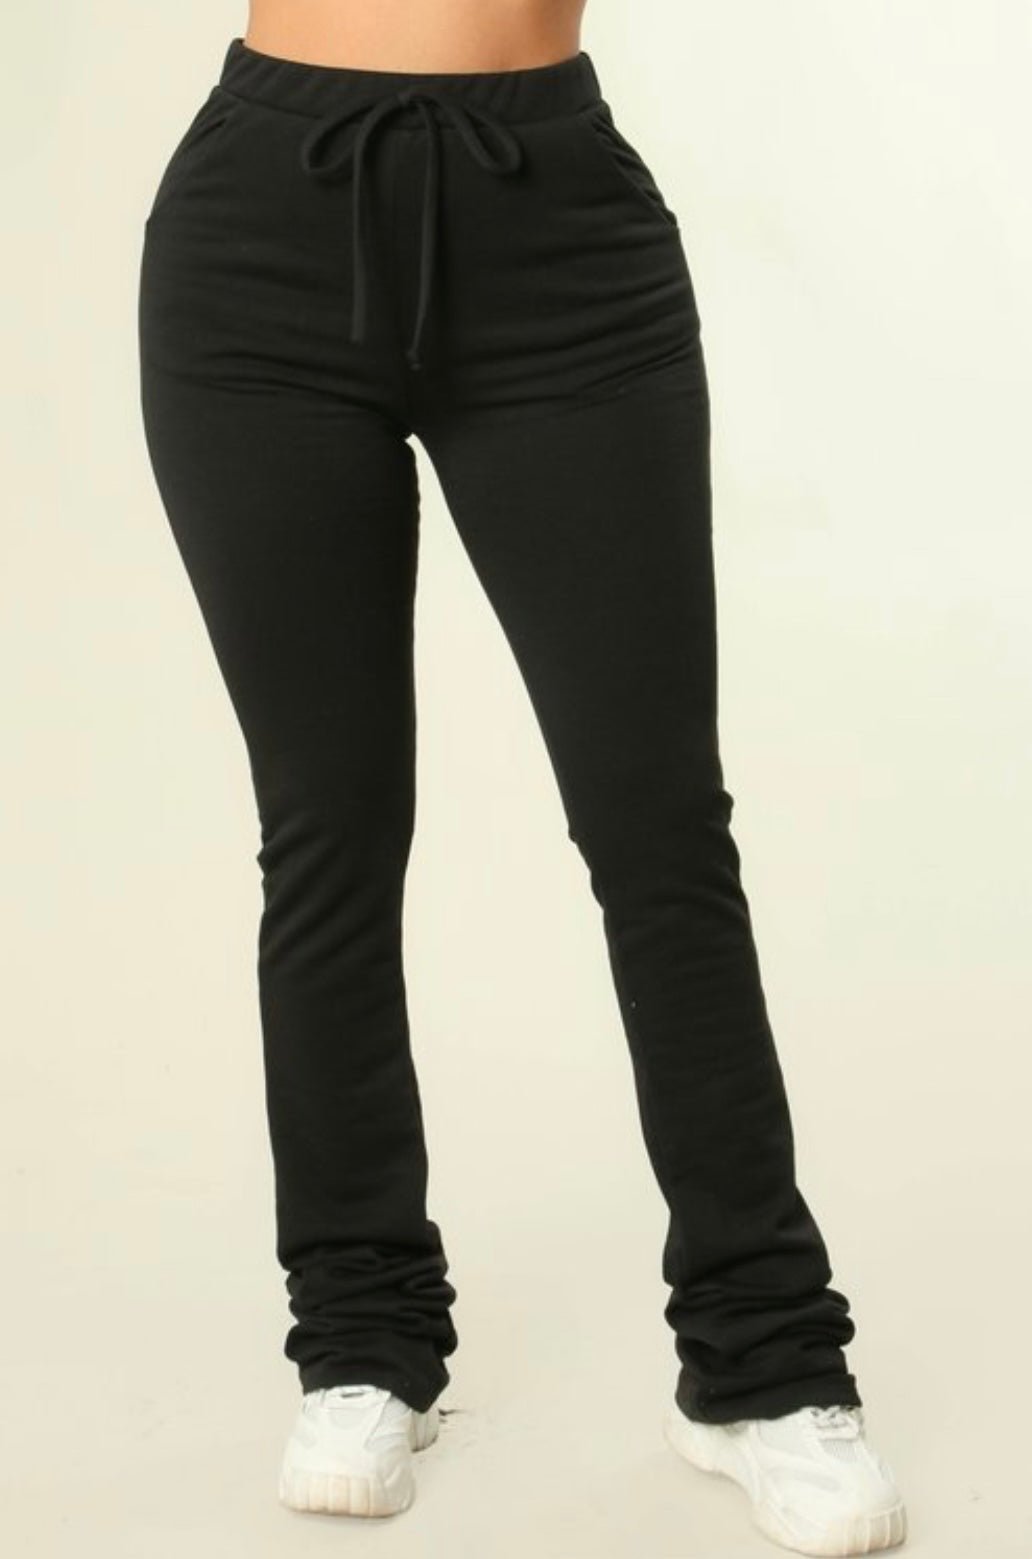 Women's Pants High Waist Skinny Stacked Pants Pant for Women